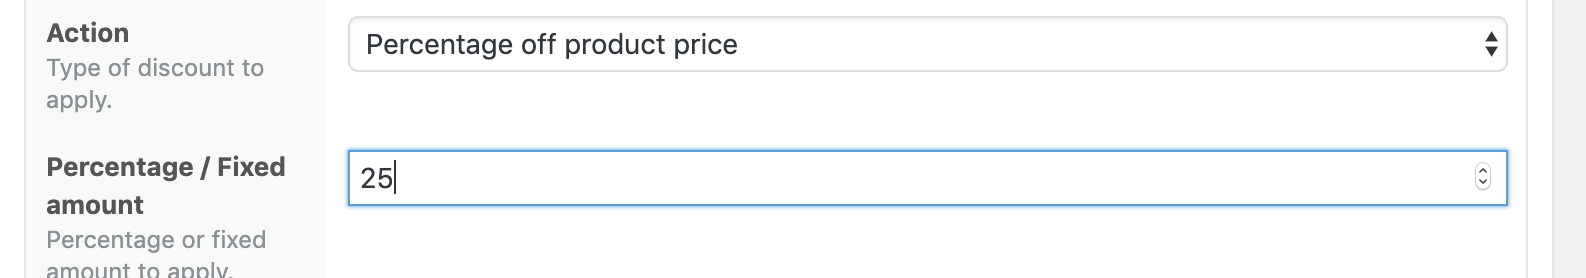 Percentage off product price Action